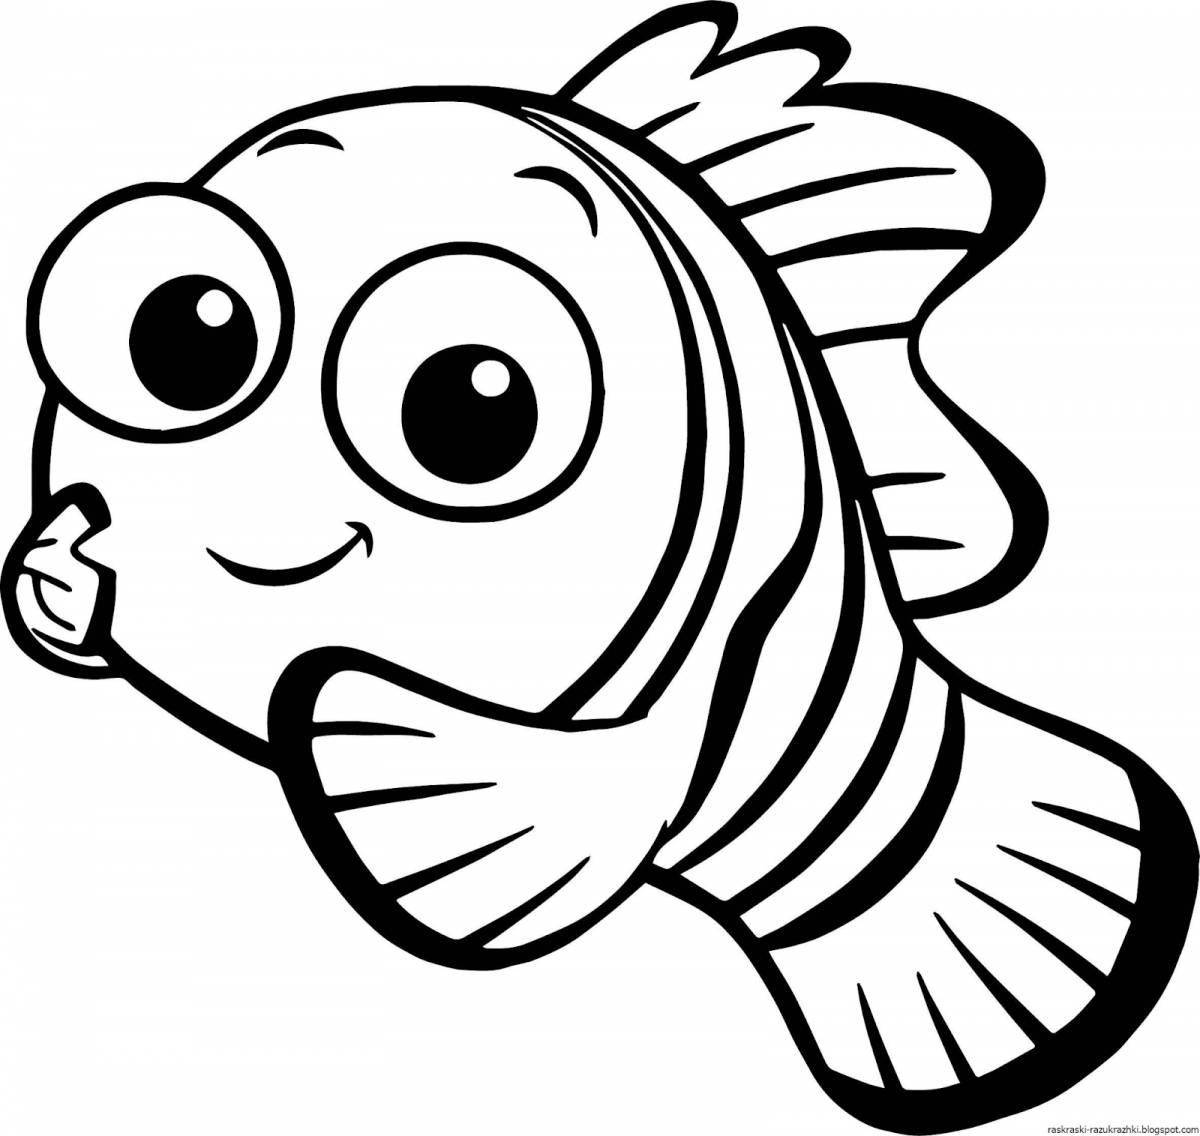 Hip fish coloring book for kids